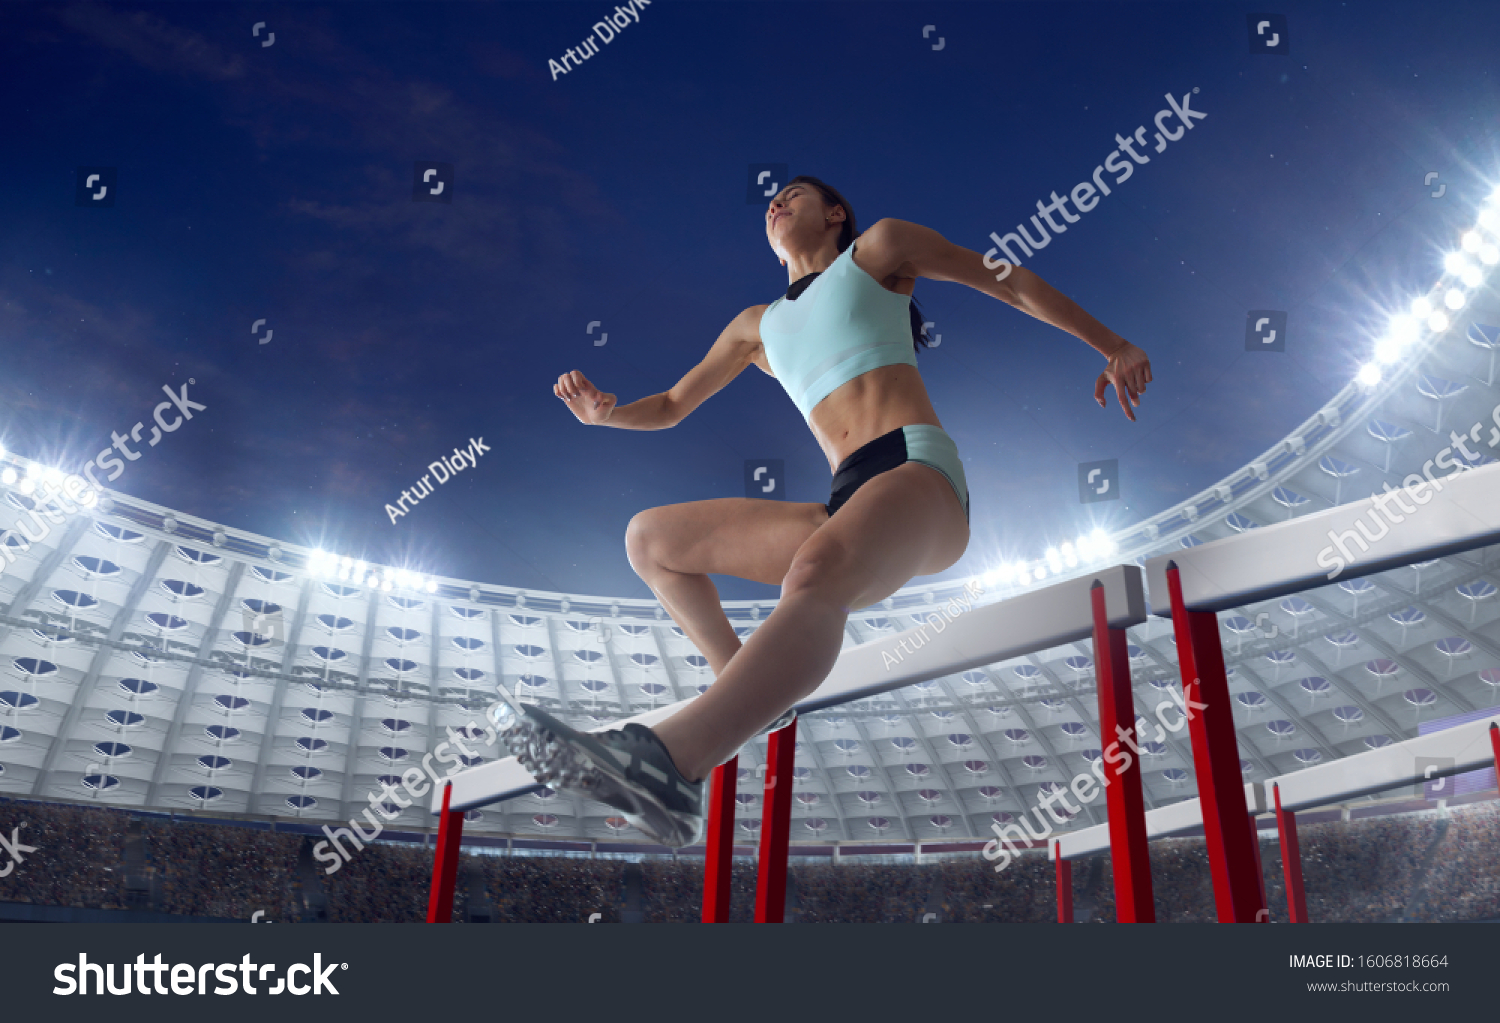 Athlete woman athlete jumps over the barrier at the running track in professional athletics stadium. #1606818664